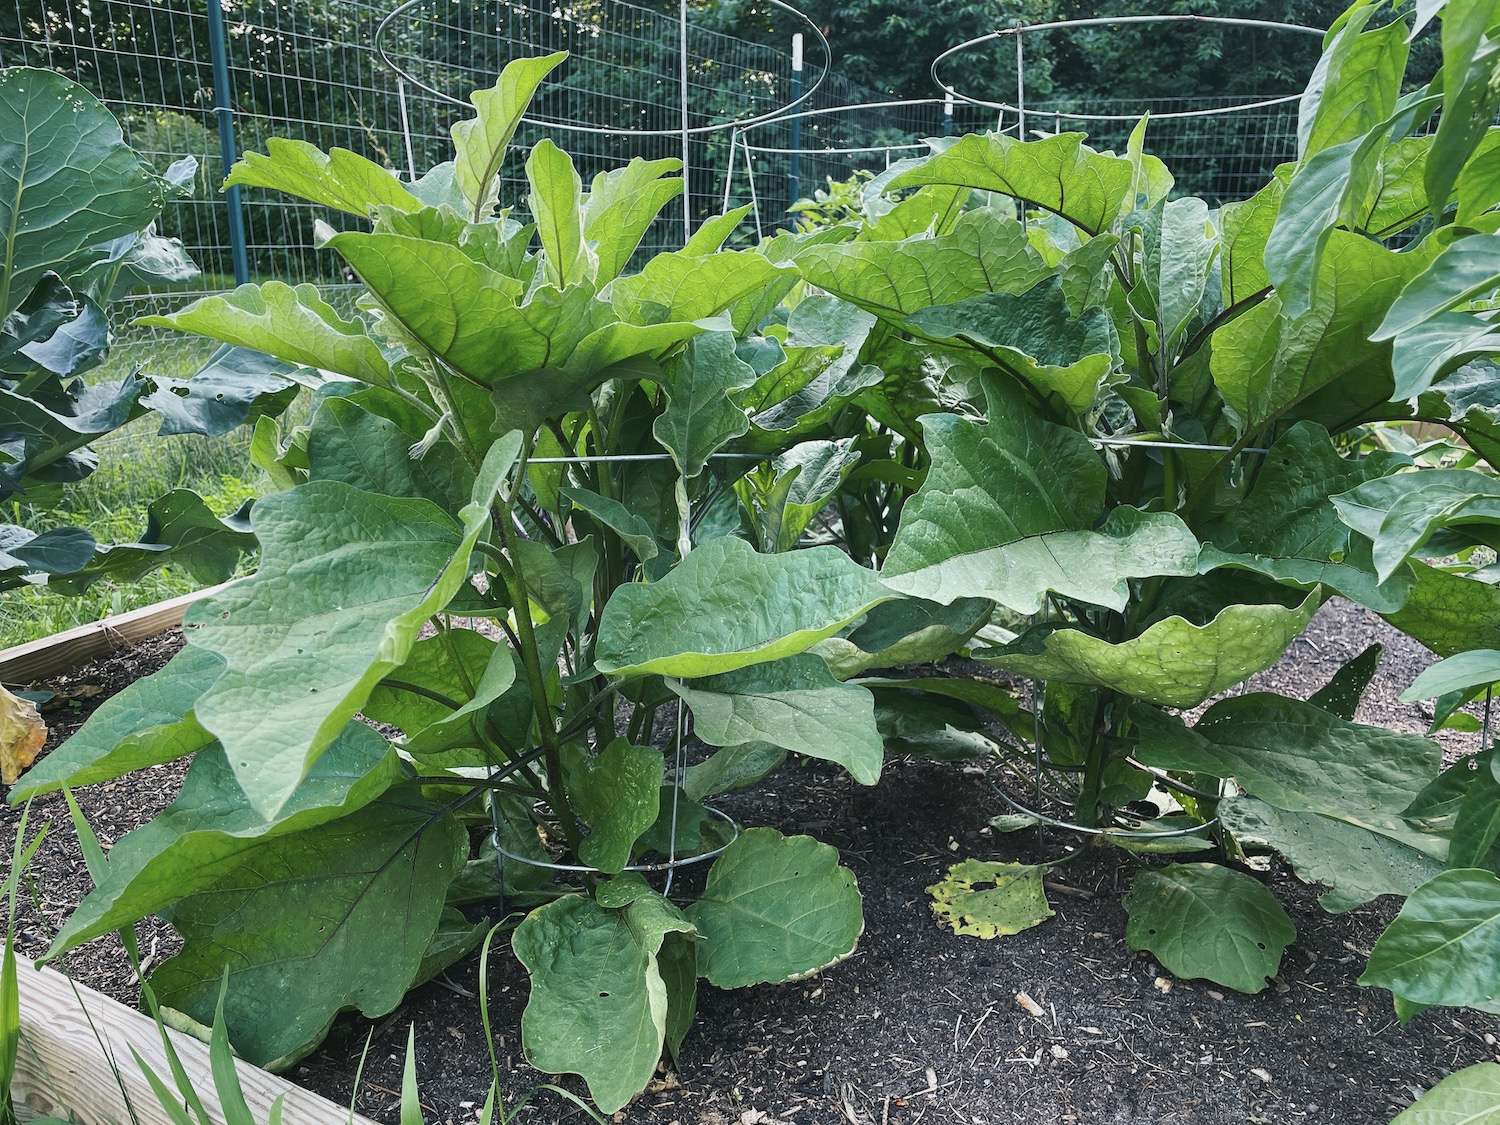 A photo of 2 eggplants in the garden